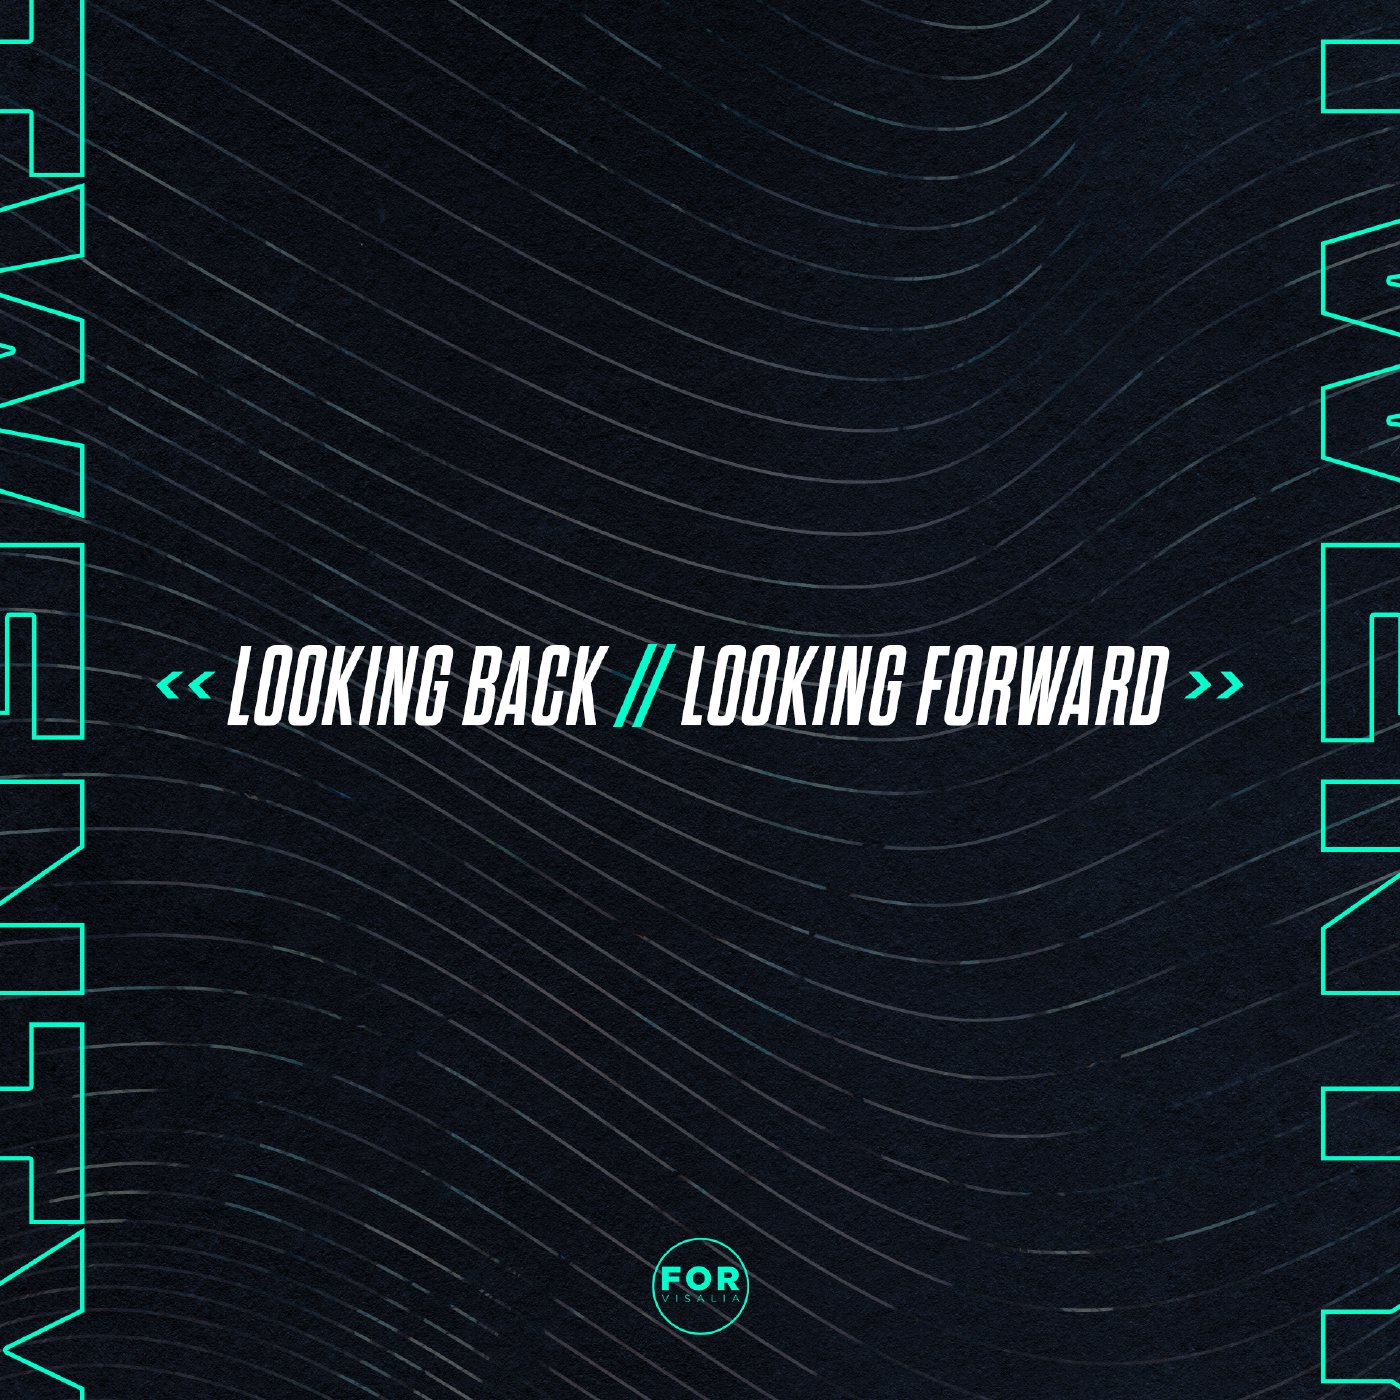 2020: Looking Back